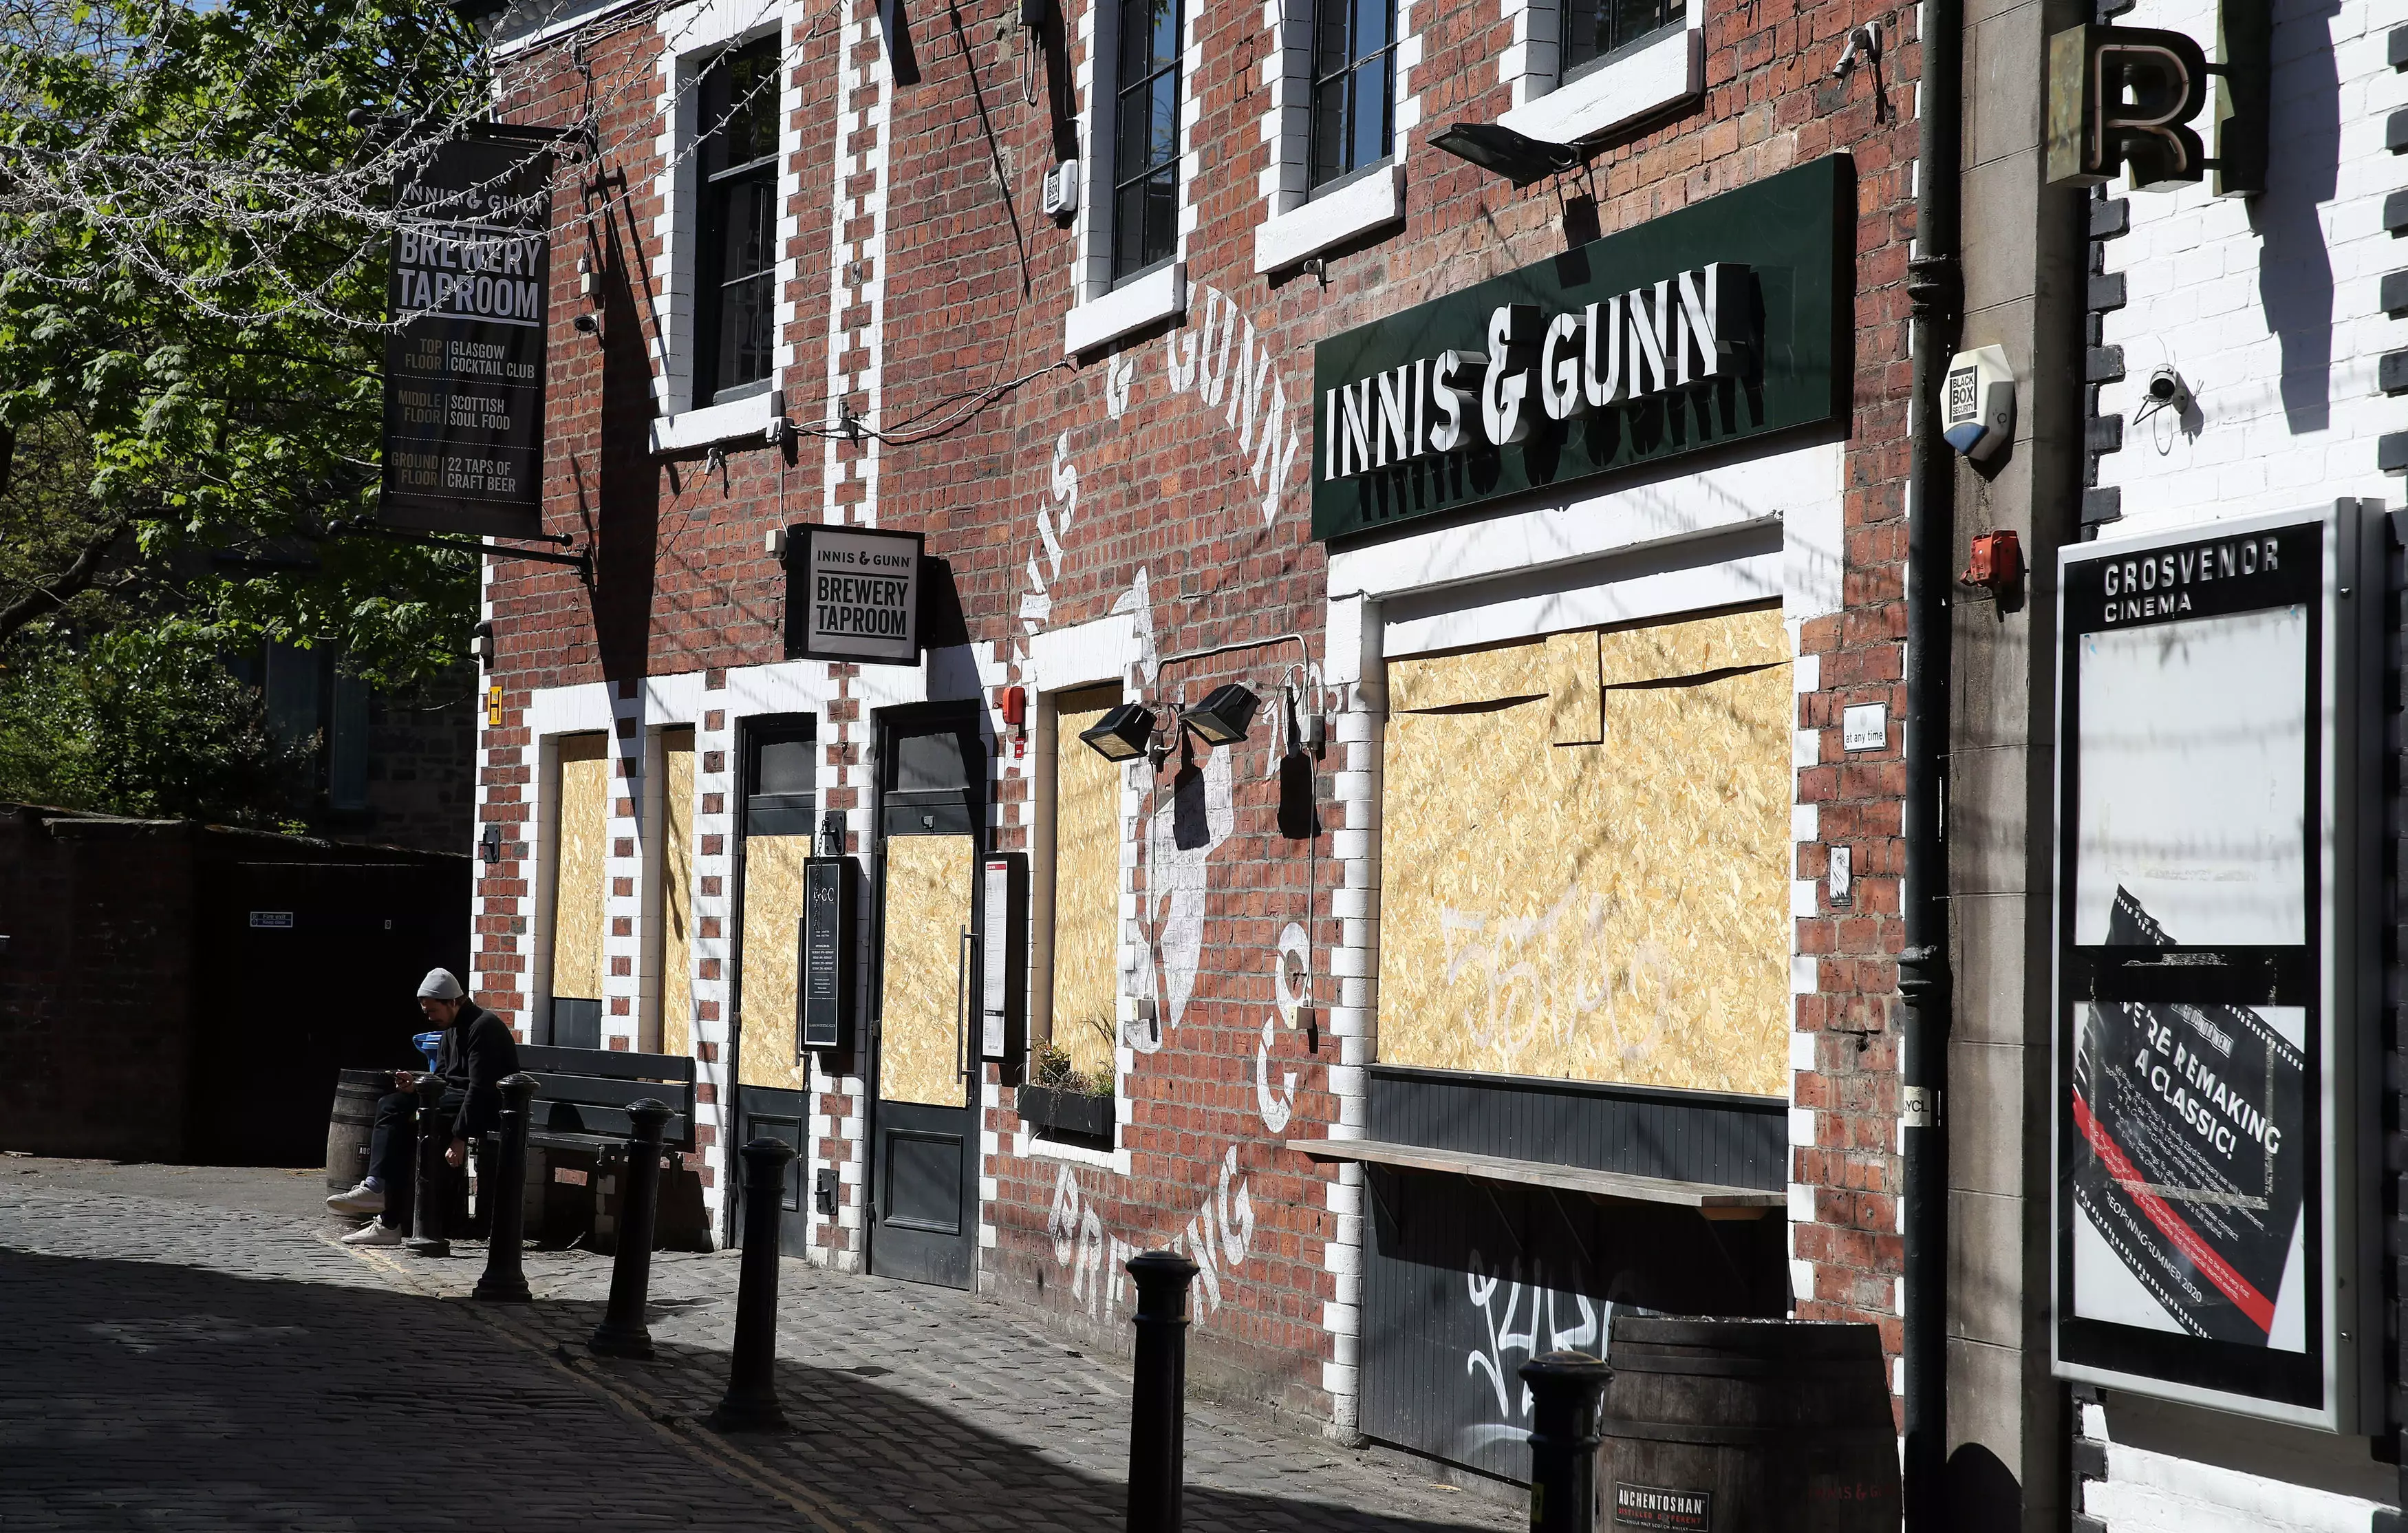 Pubs across the UK suffered during the full lockdown.